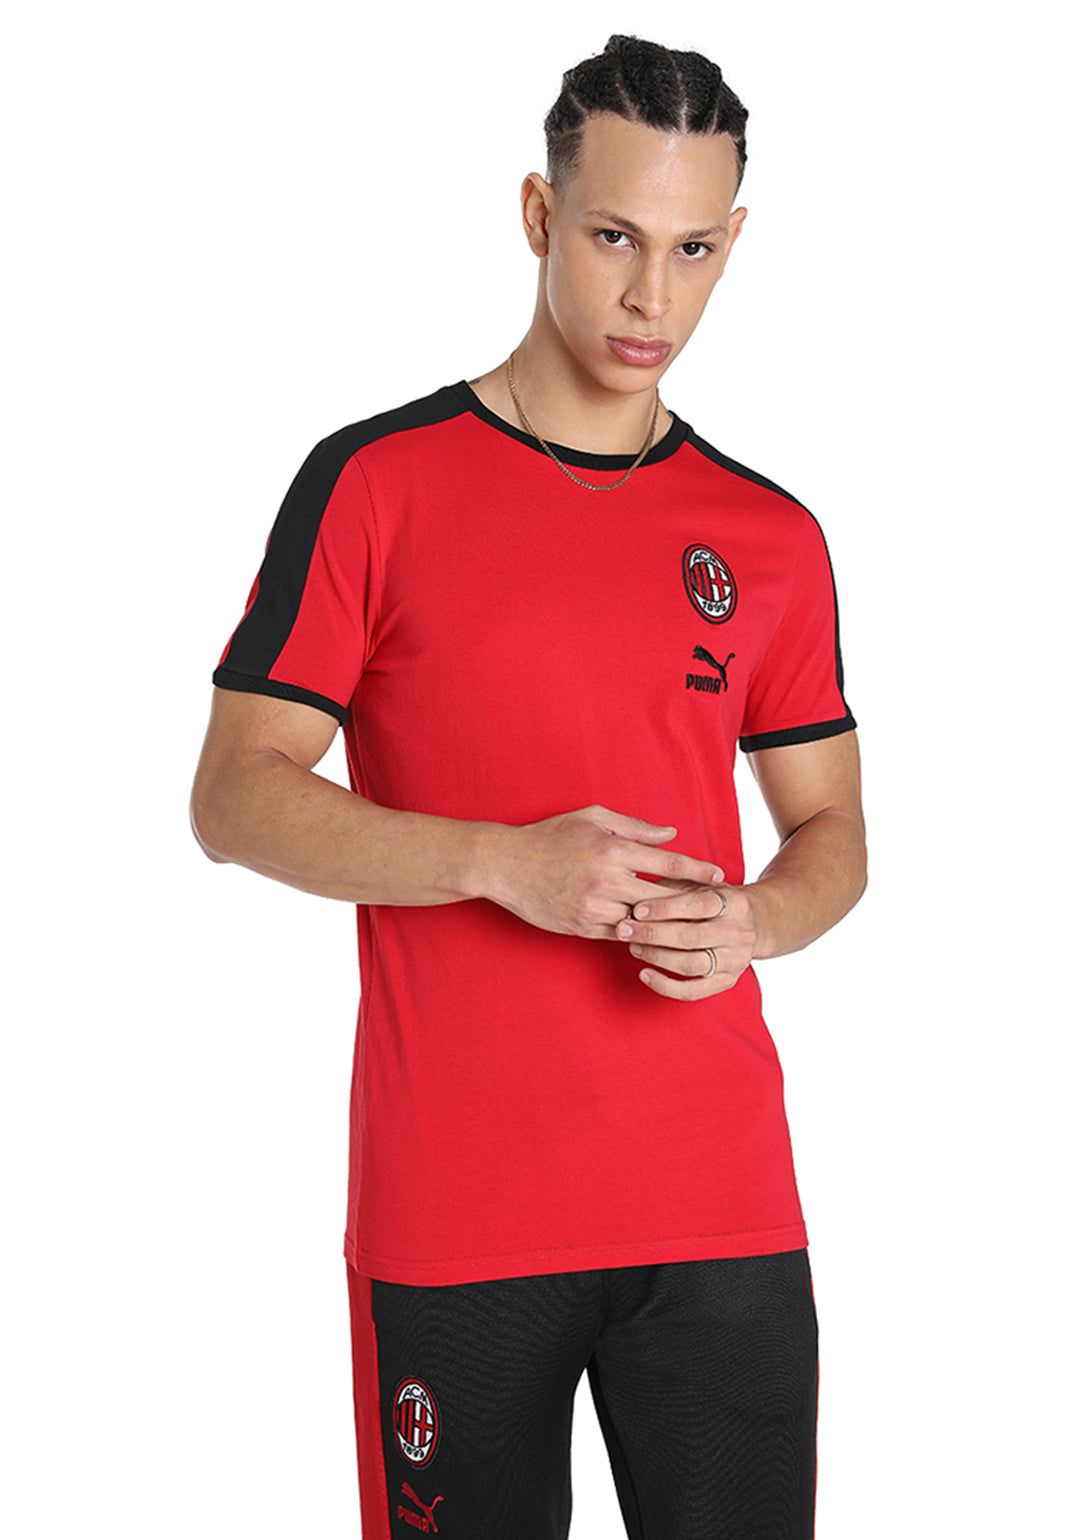 Buy Men Red and Black ACM T7 From T-Shirt FtblHeritage Fancode